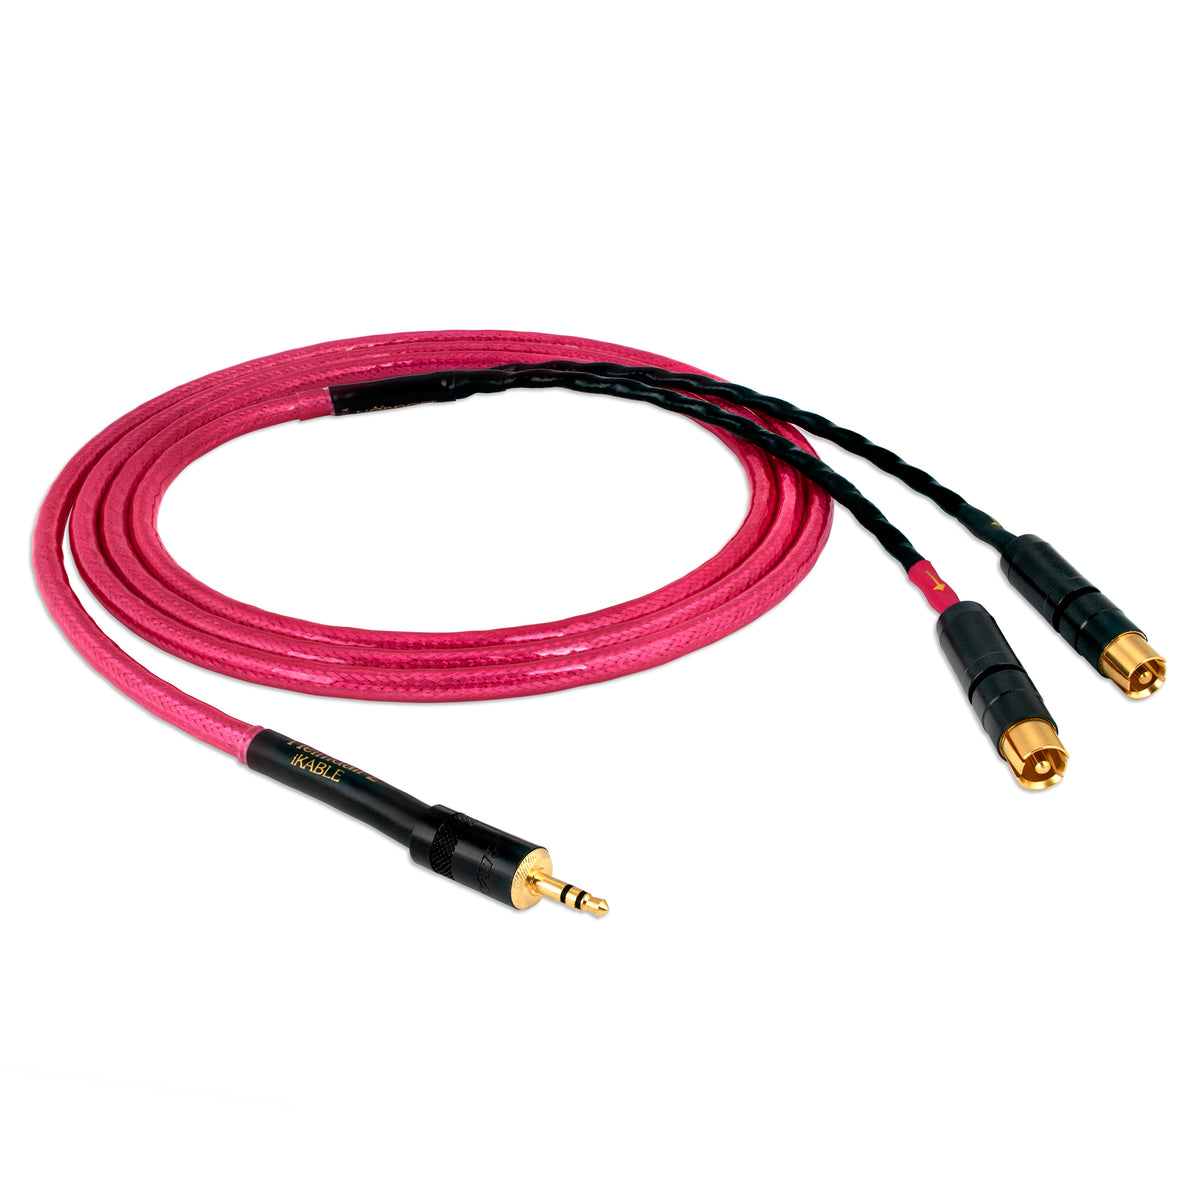 Heimdall 2 iKable 3.5mm to RCA